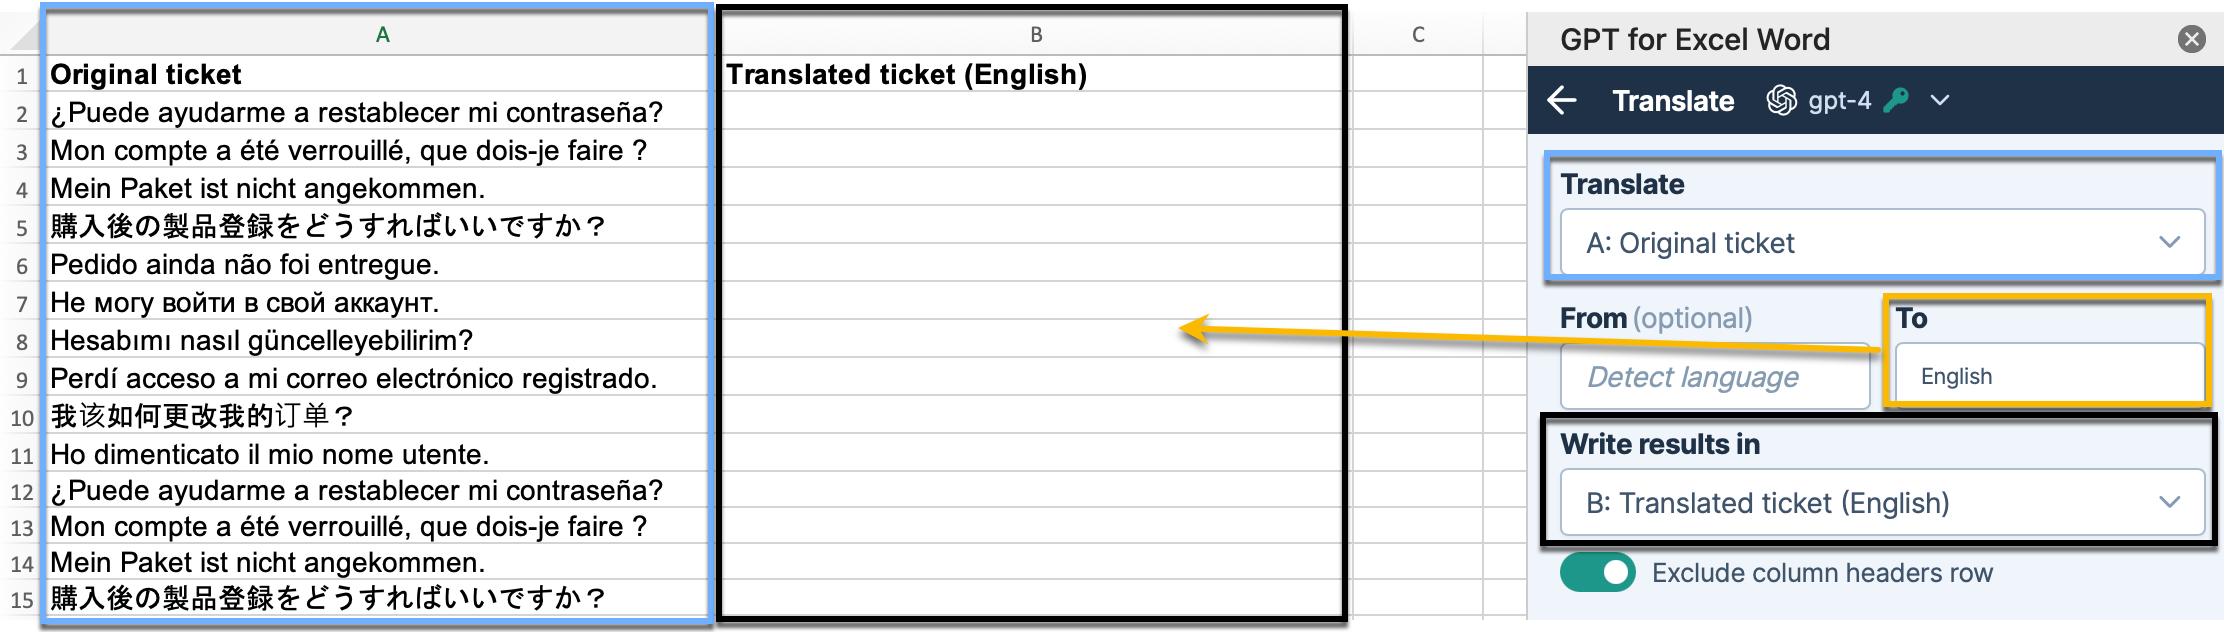 The image shows steps to select a column to translate, optionally set or auto-detect the source language, specify the target language, and choose a results column.